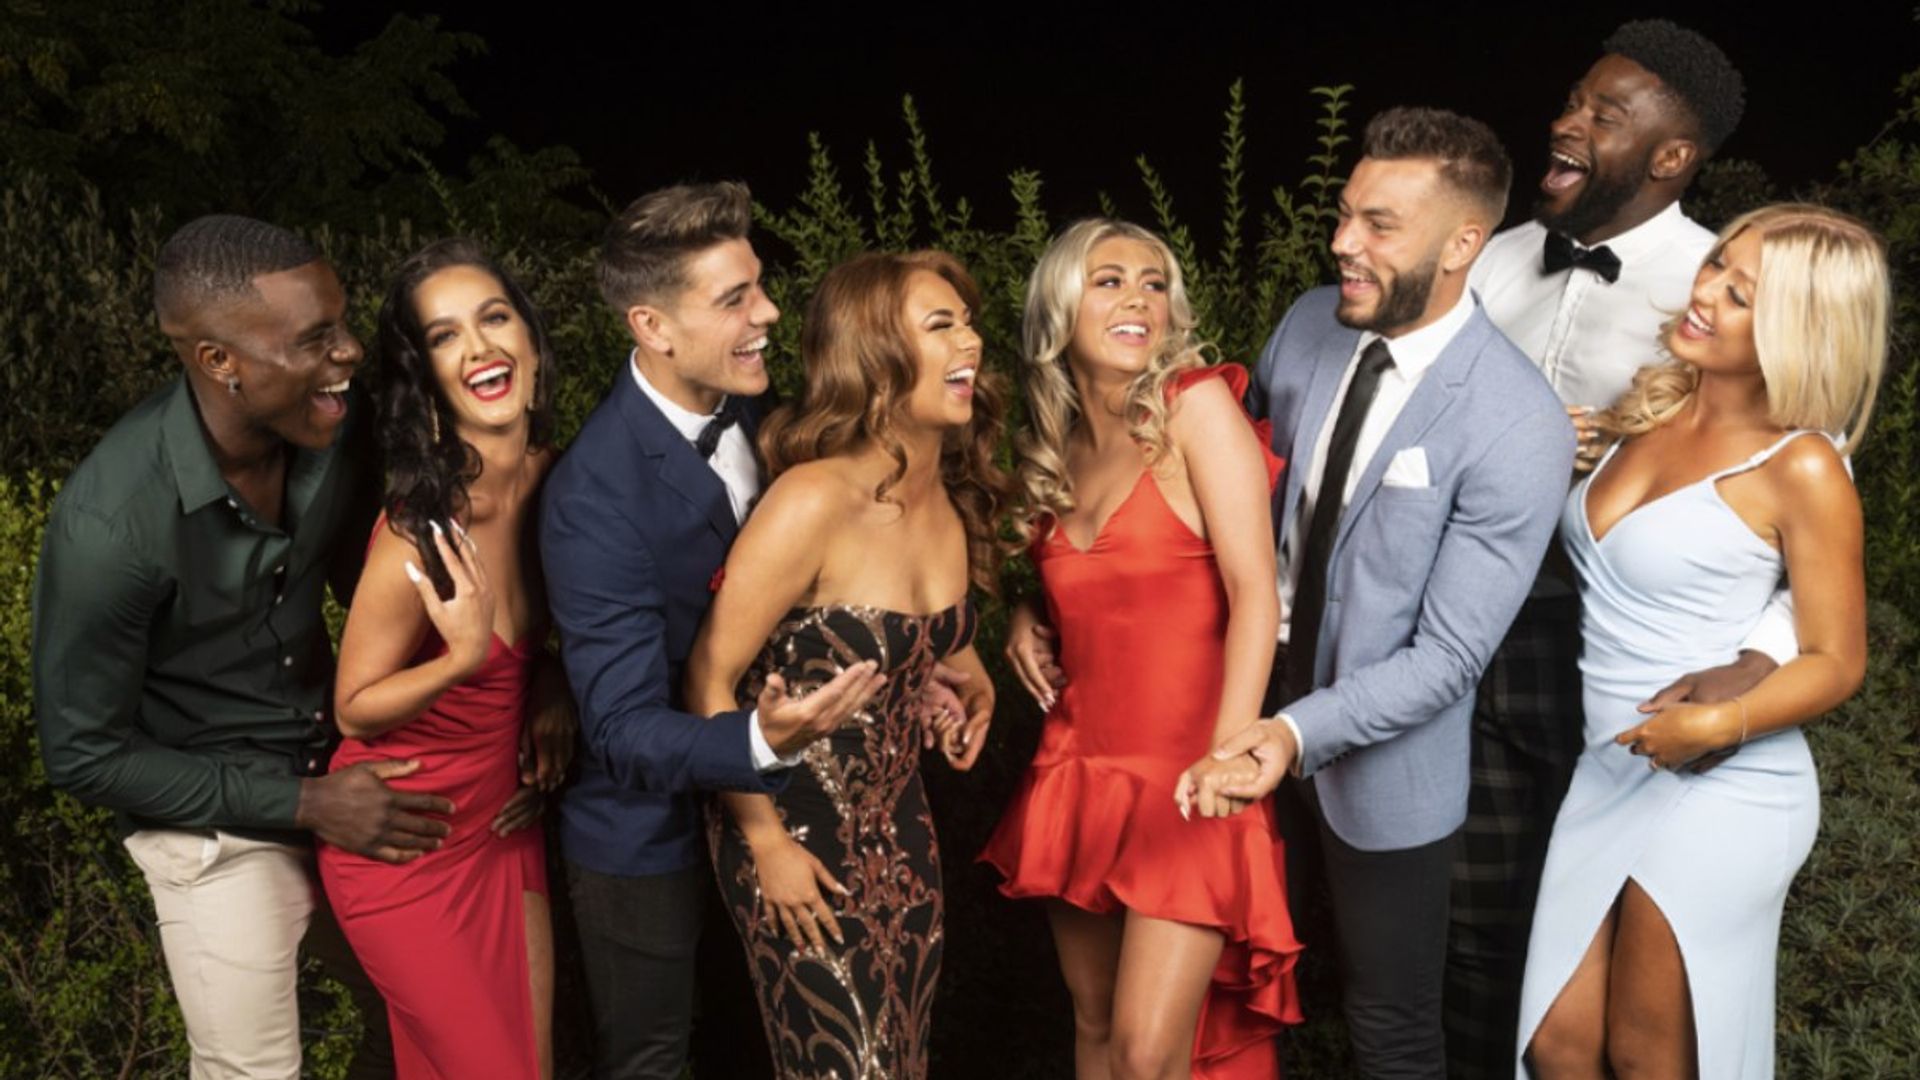 Love Island 2020 Winners Announced See Which Couple Won Hello If you've been paying attention, you're likely not shocked to learn that it was justine ndiba and caleb corprew who. love island 2020 winners announced